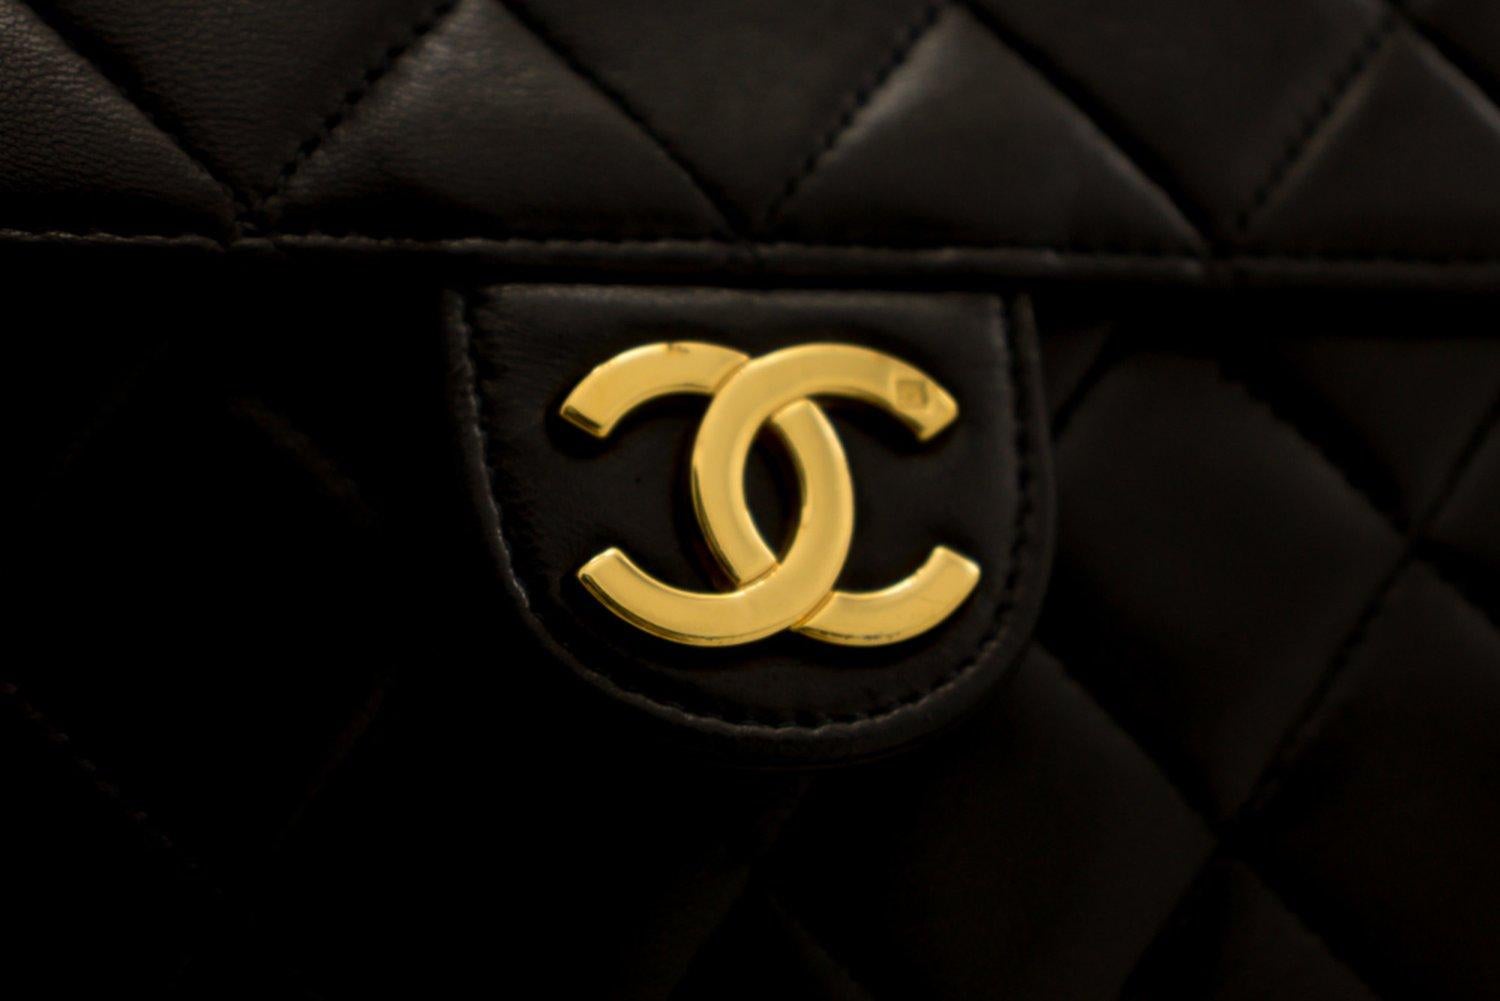 CHANEL Small Chain Shoulder Bag Black Clutch Flap Quilted Lambskin 6